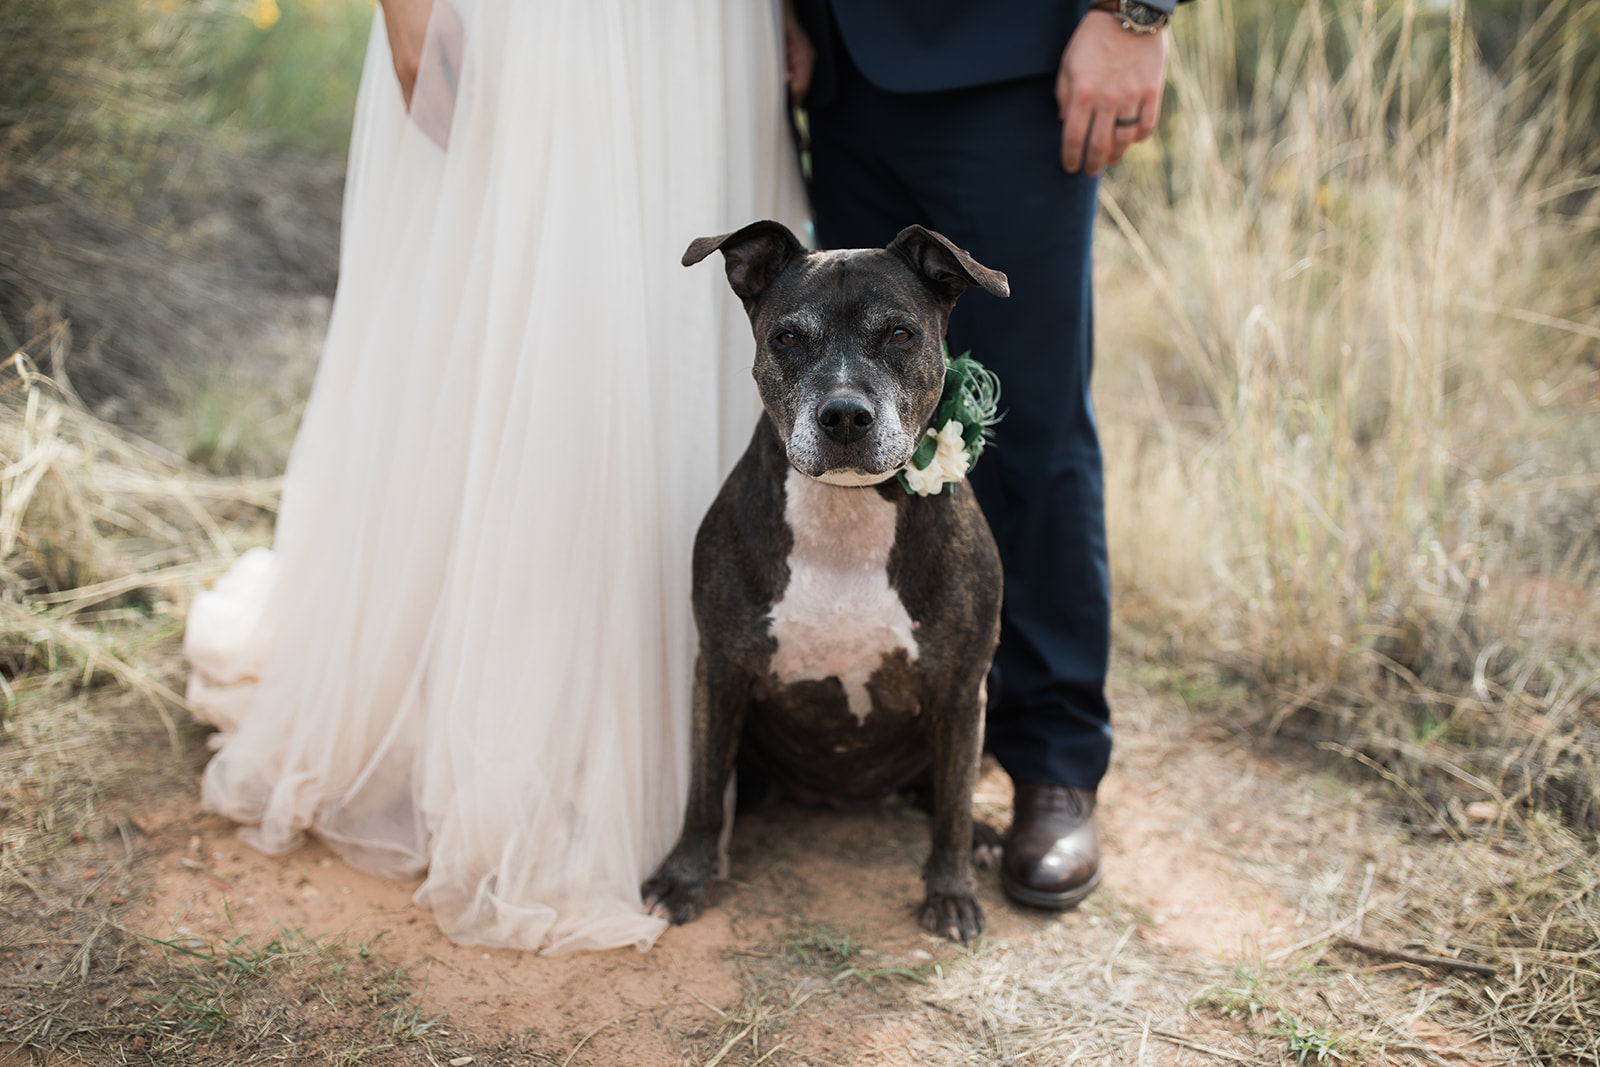 bride and groom pose with their dog after ceremony